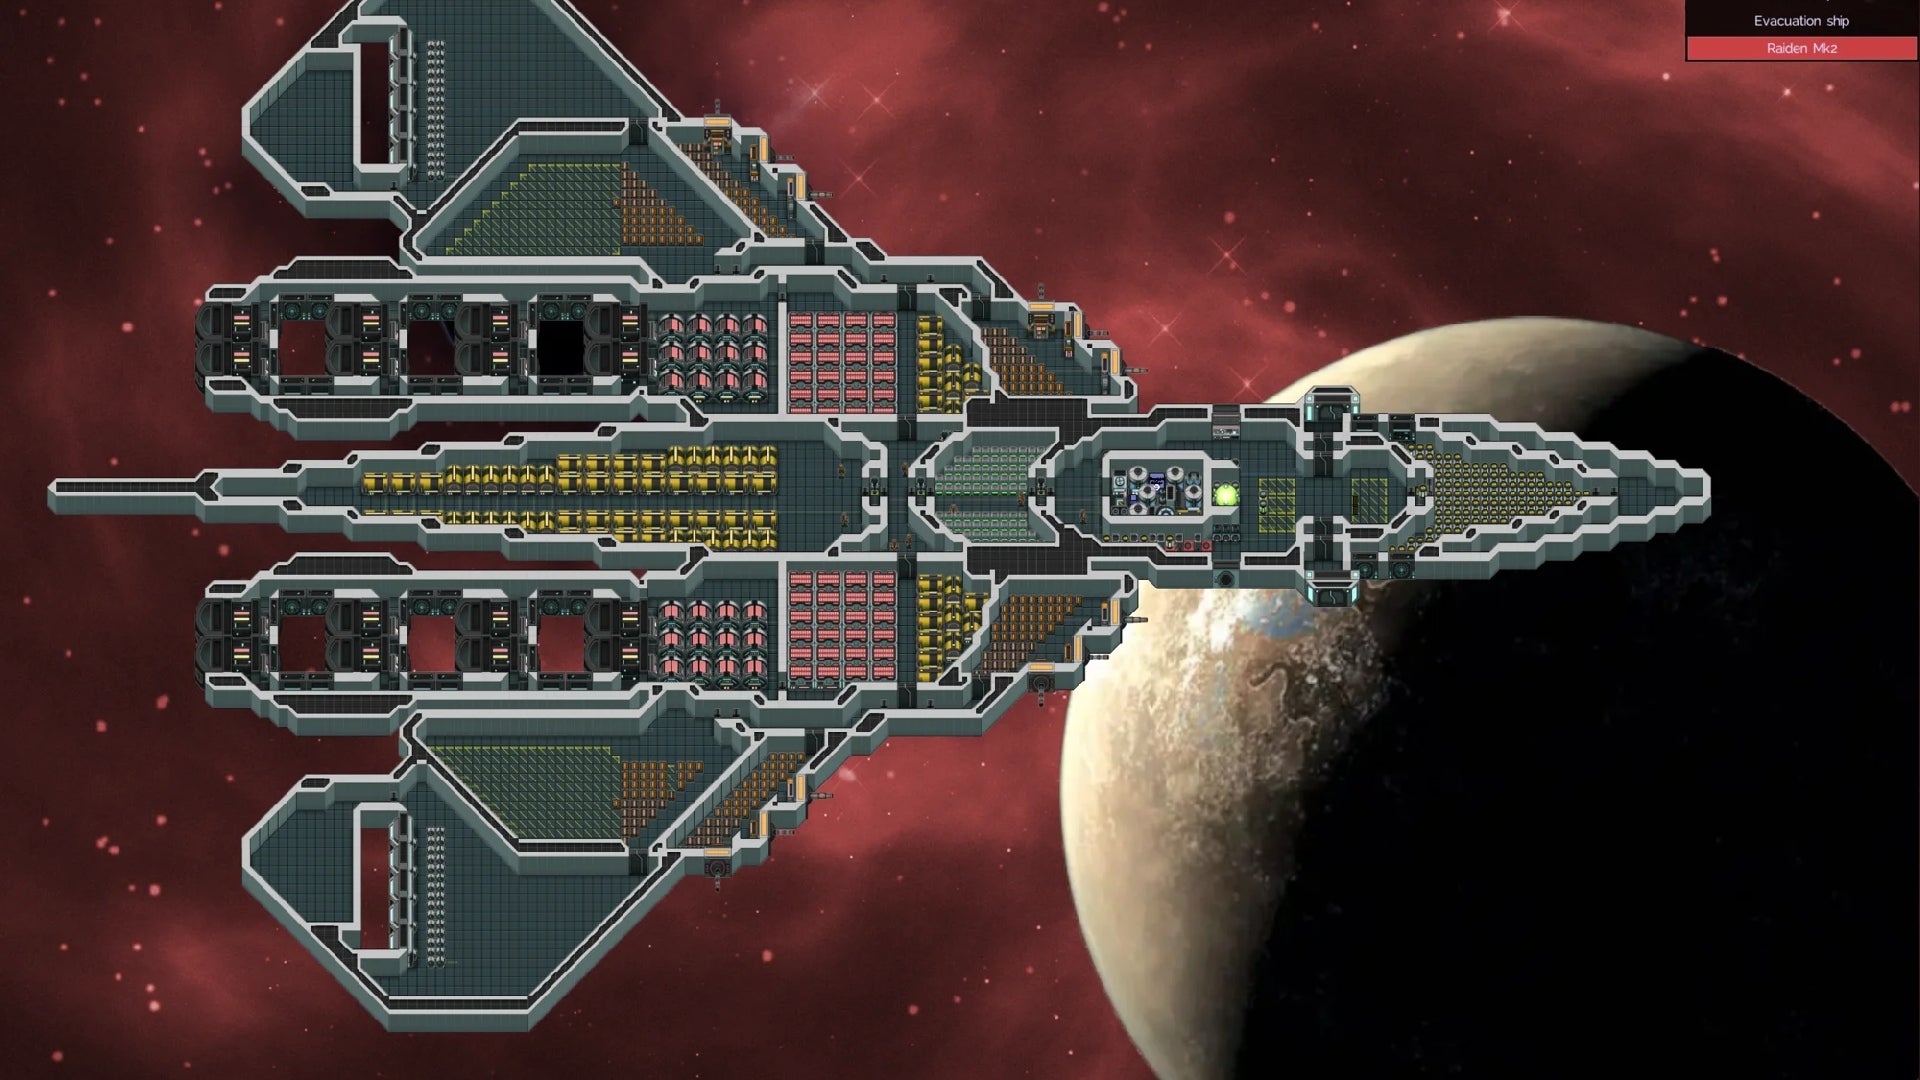 Screenshot from The Last Starship showing a vessel flying through space in front of a lifeless planet